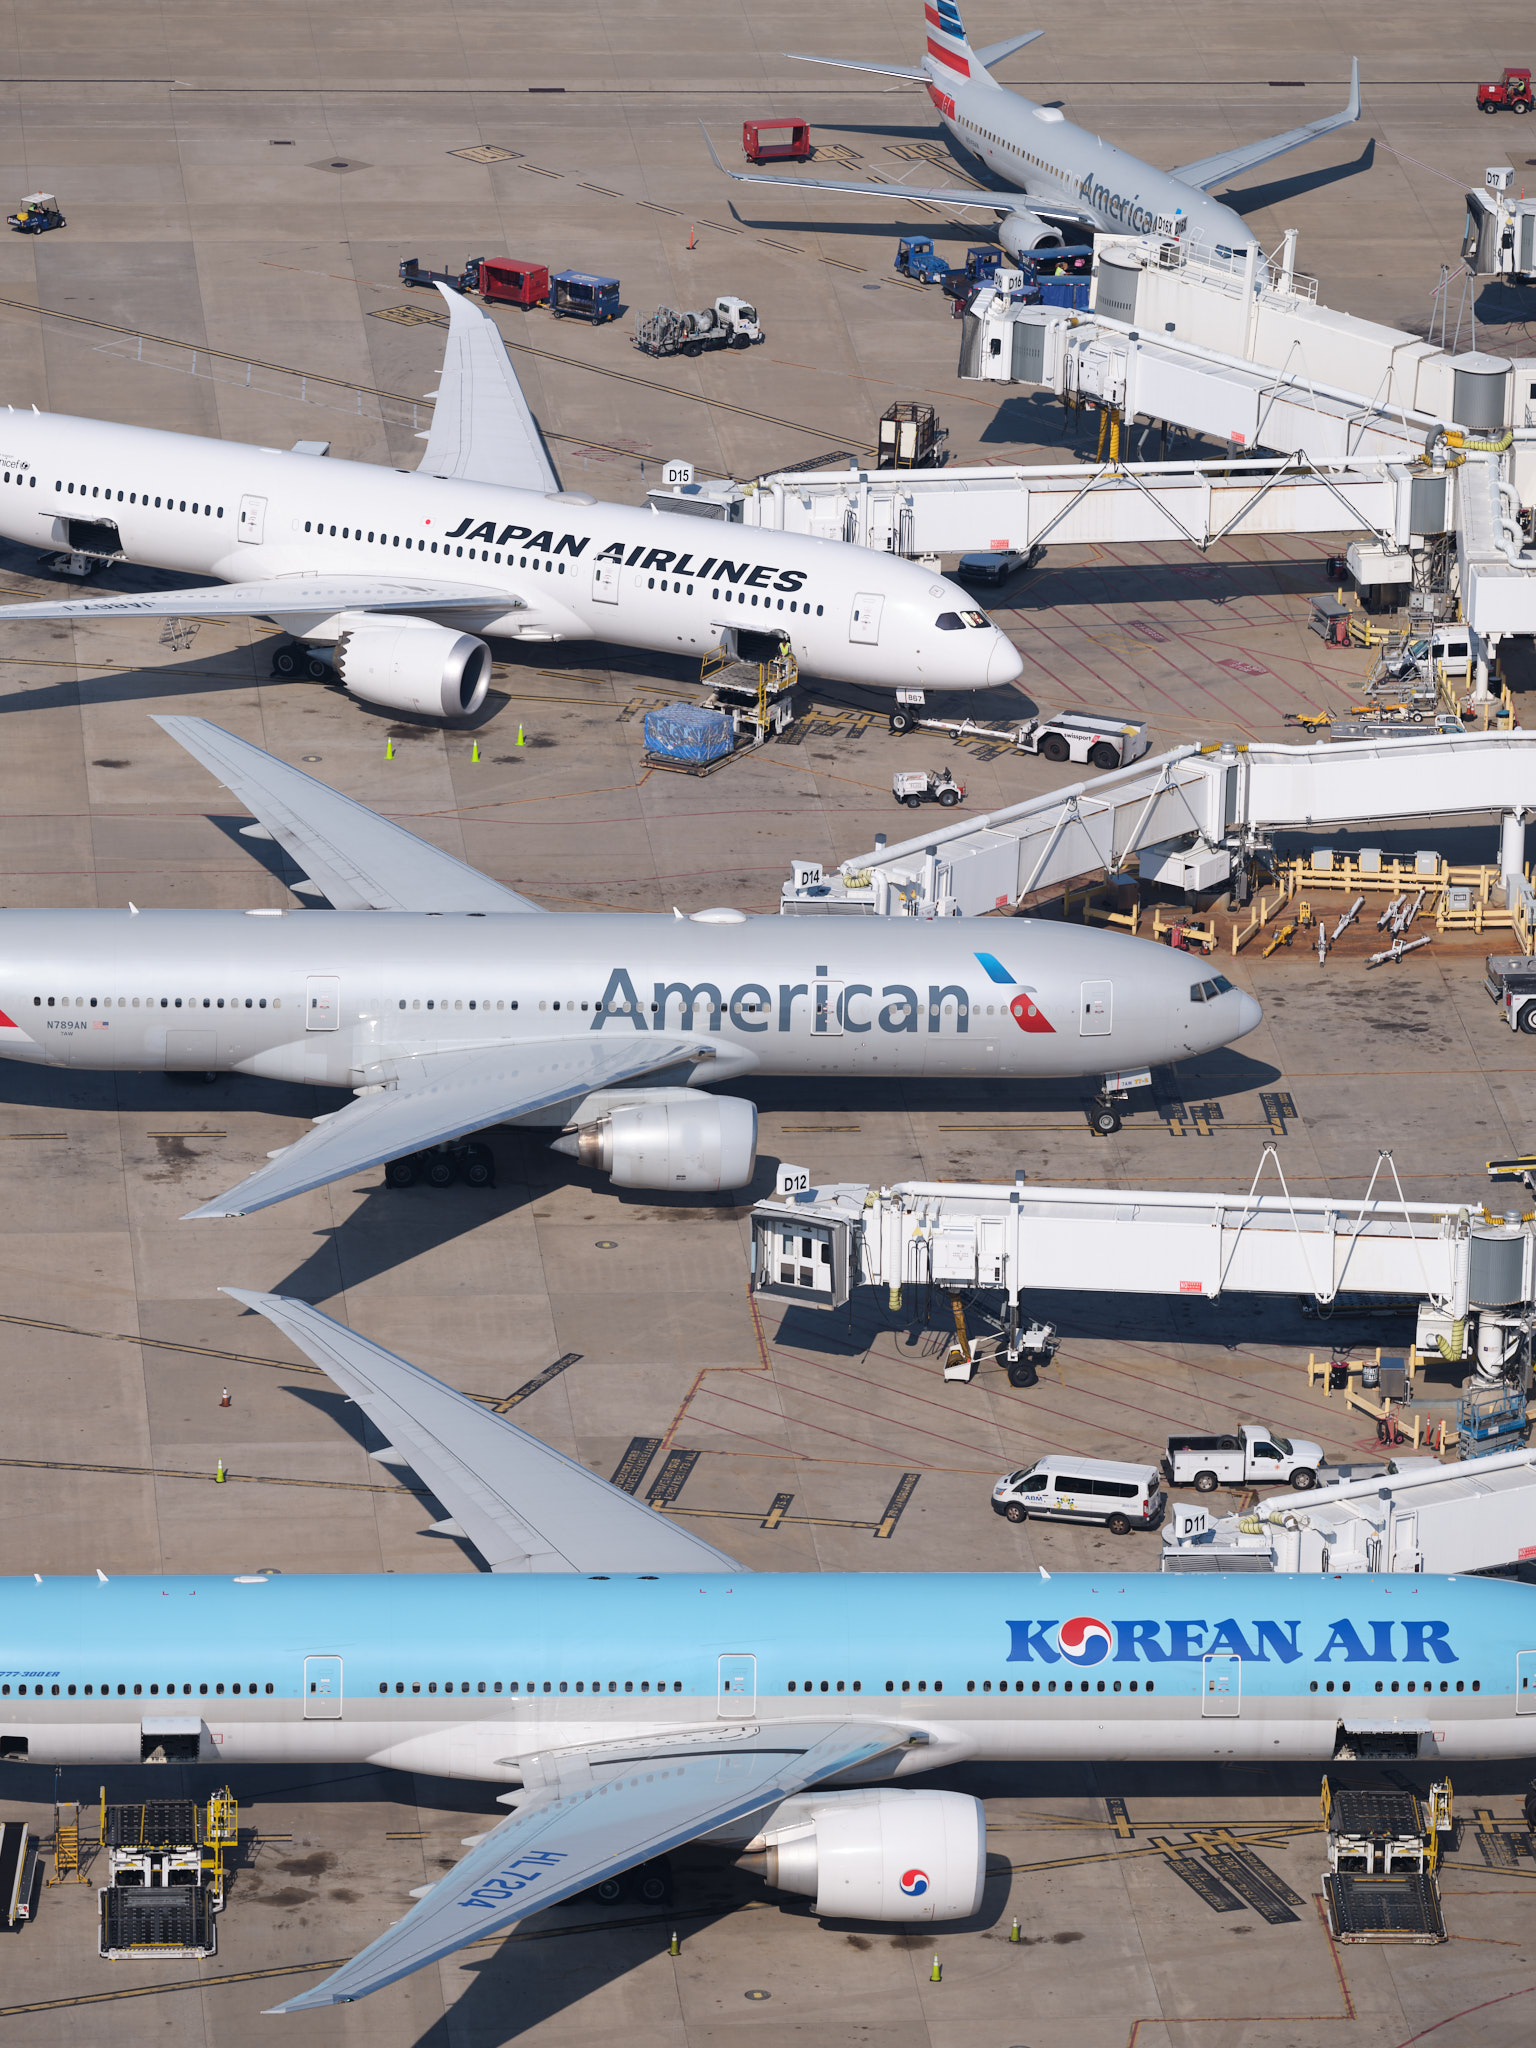 an aerial view of airplanes at an airport